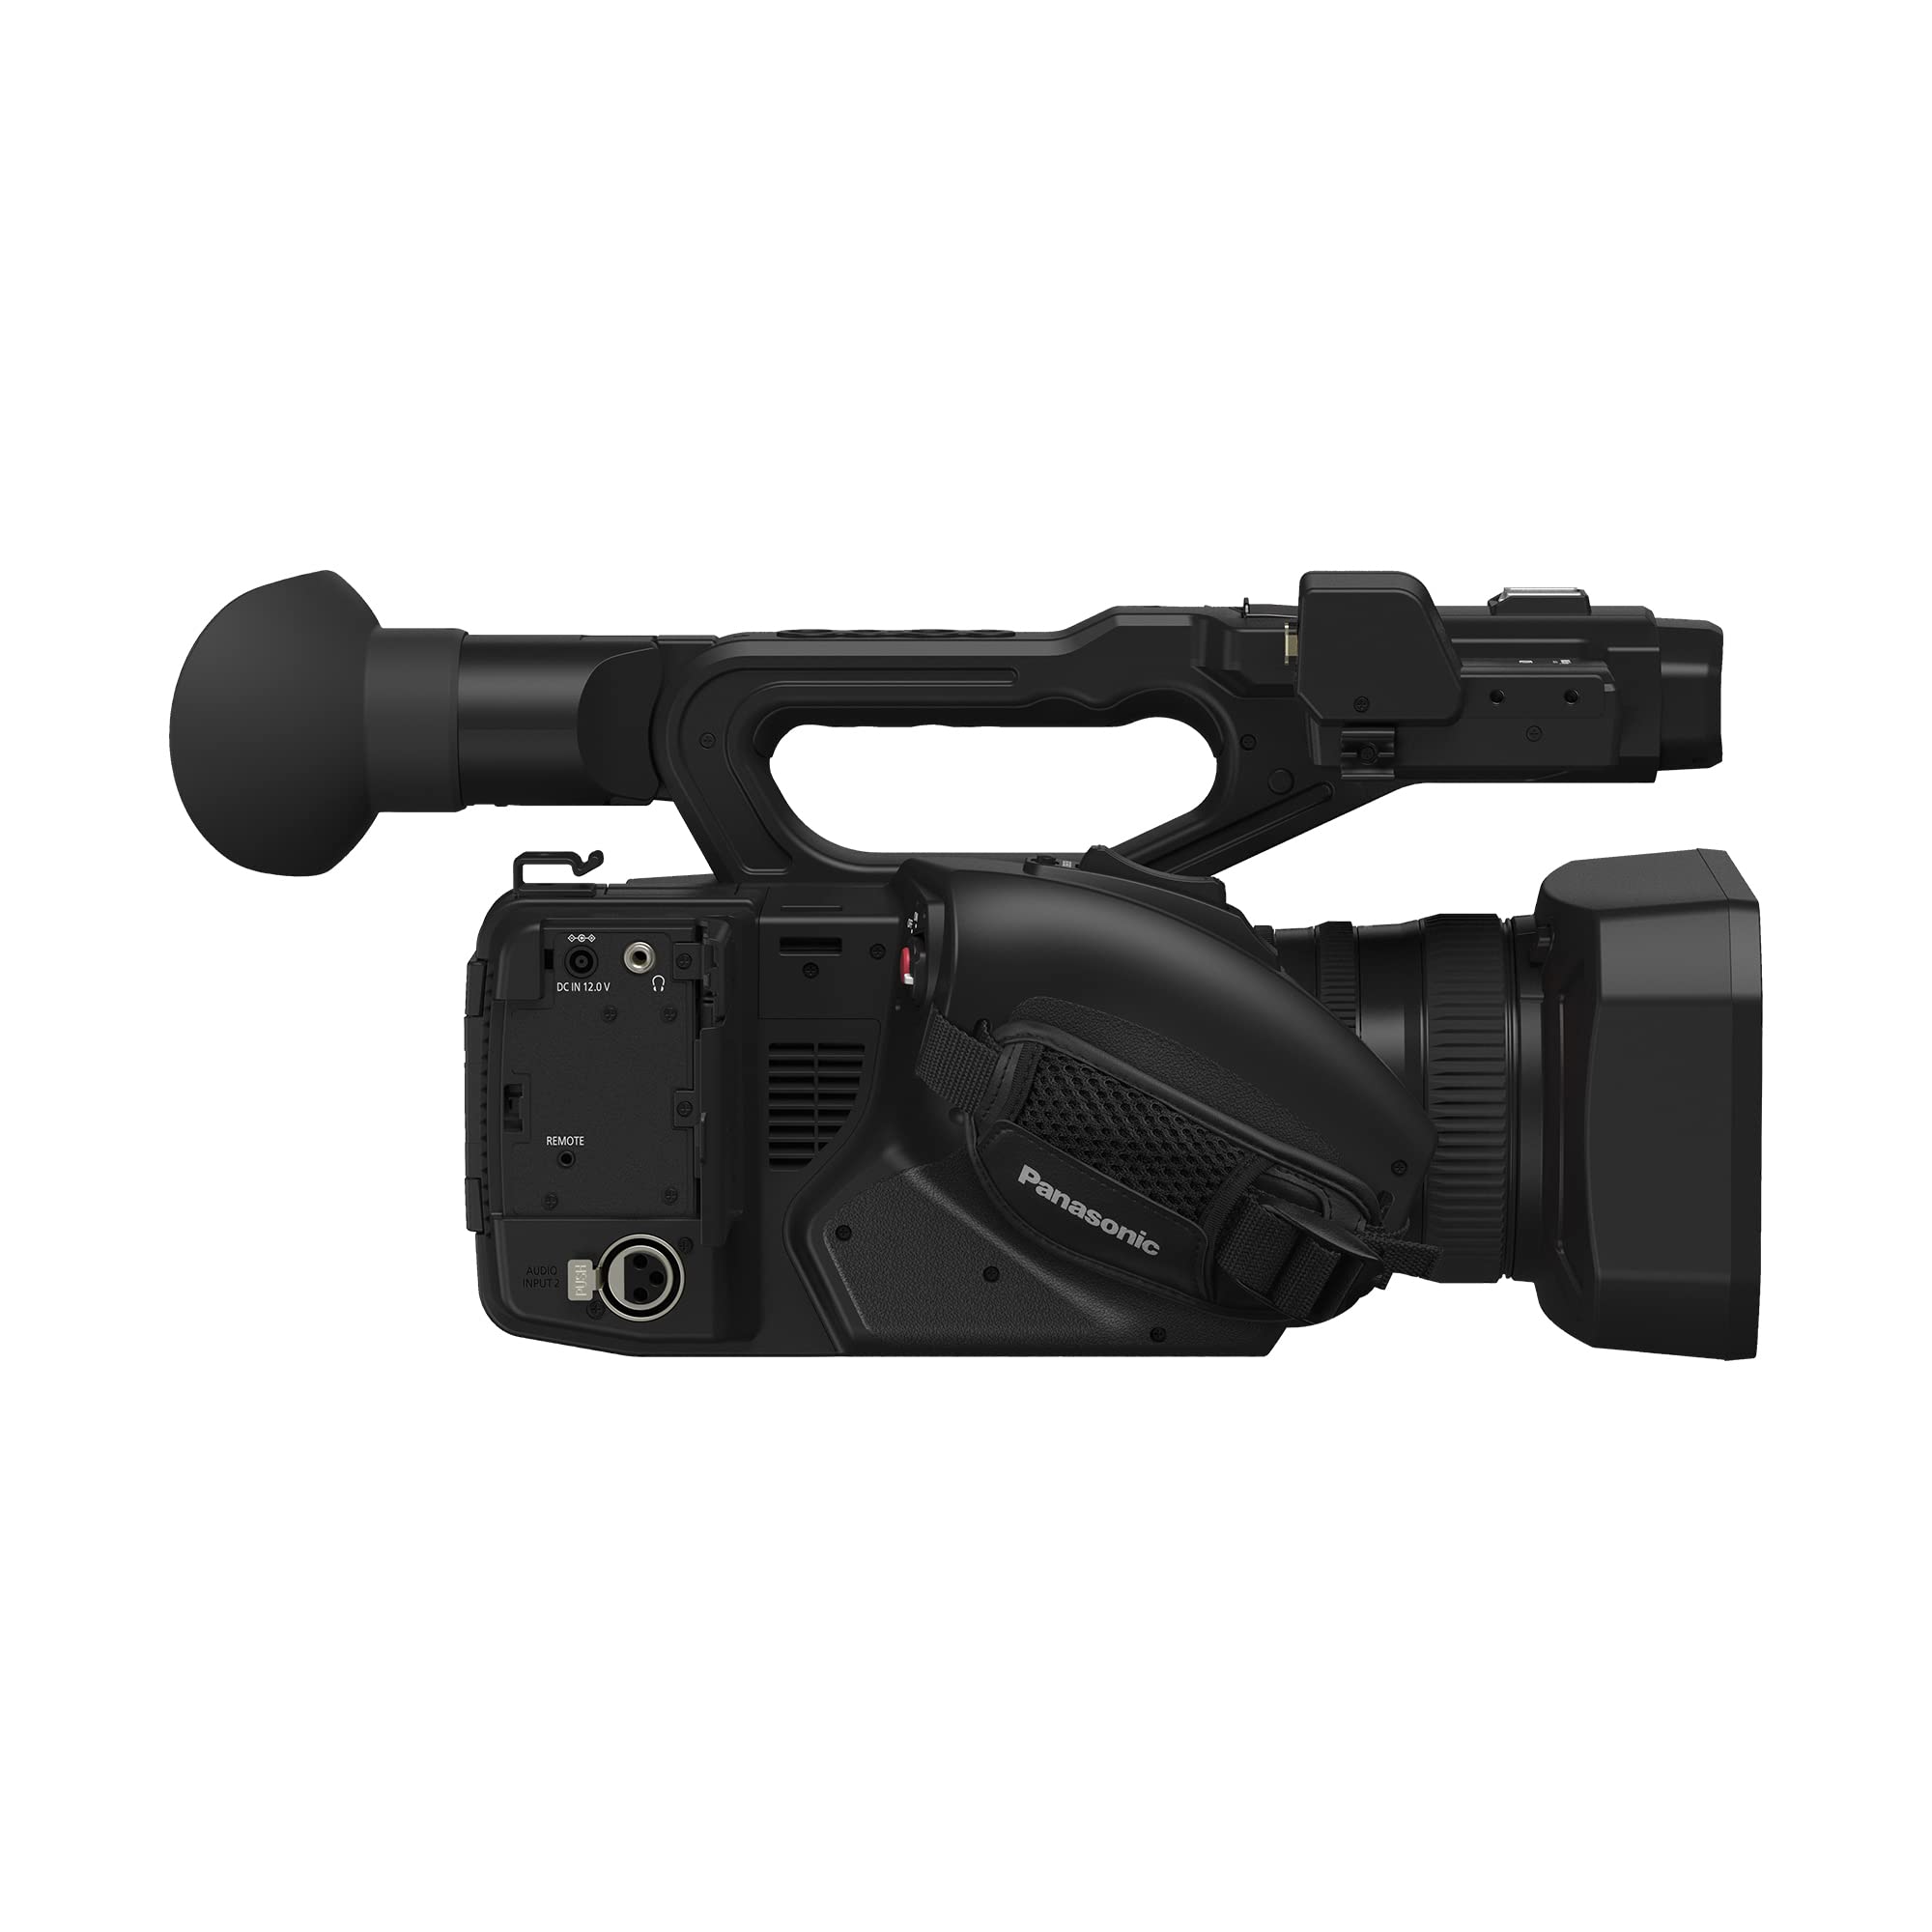 Panasonic Camcorder, Professional Quality 4K 60p, 1.0-inch Sensor, 24.5mm Wide-Angle Lens and Optical 20x Zoom, Great for News, Interviews, and Events - HC-X20